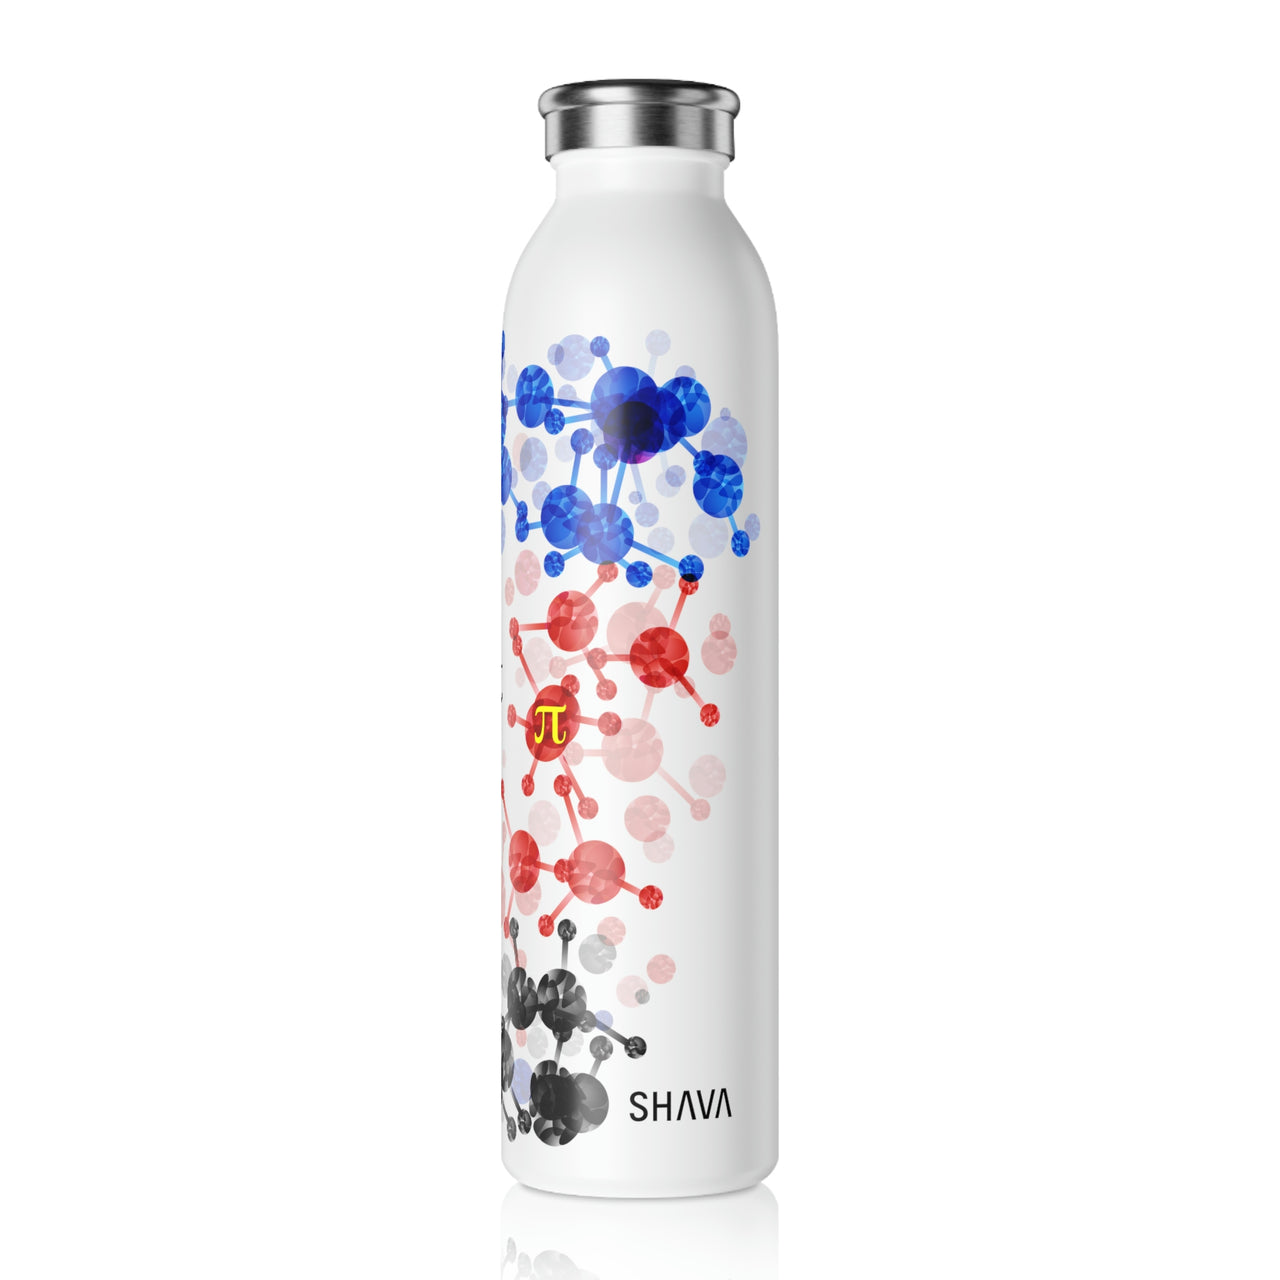 Polyamory Flag Slim Water Bottle Key West Pride - My Rainbow is In My DNA SHAVA CO